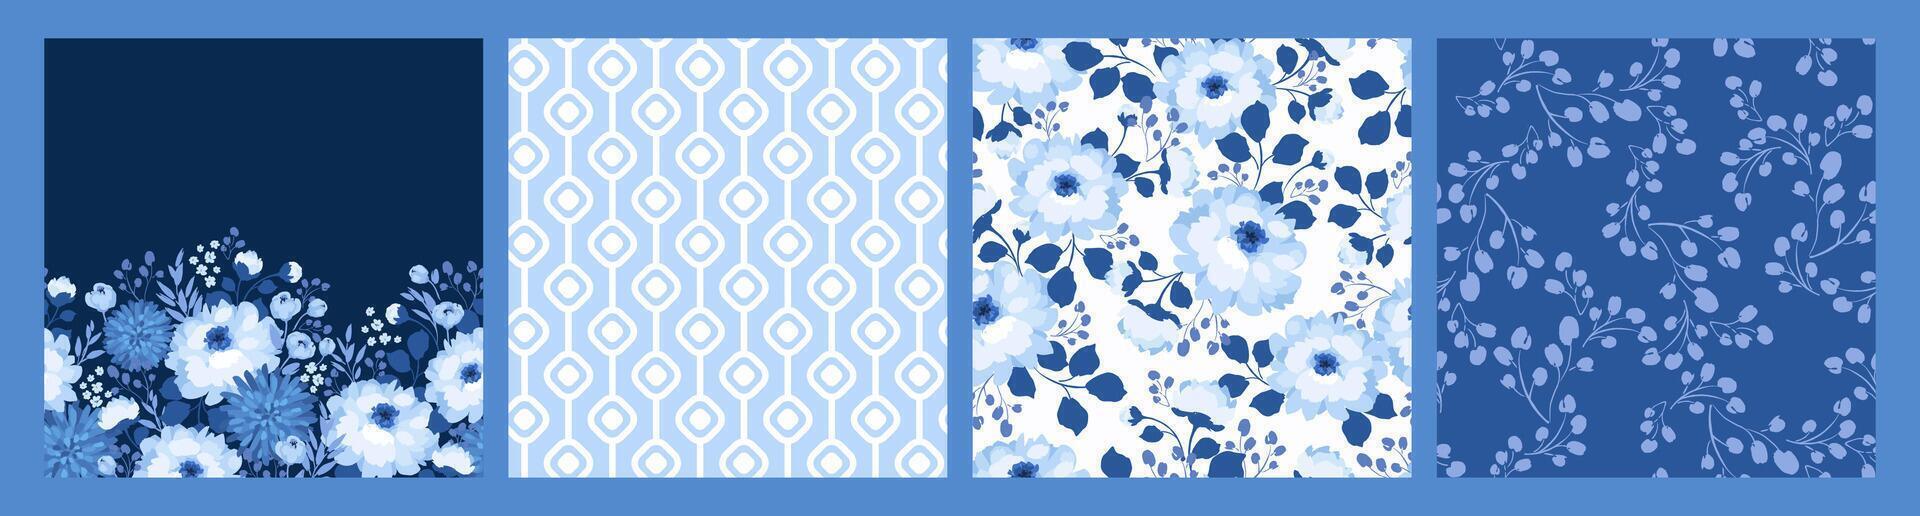 Blue floral seamless patterns. design for paper, cover, fabric, interior decor and other uses vector